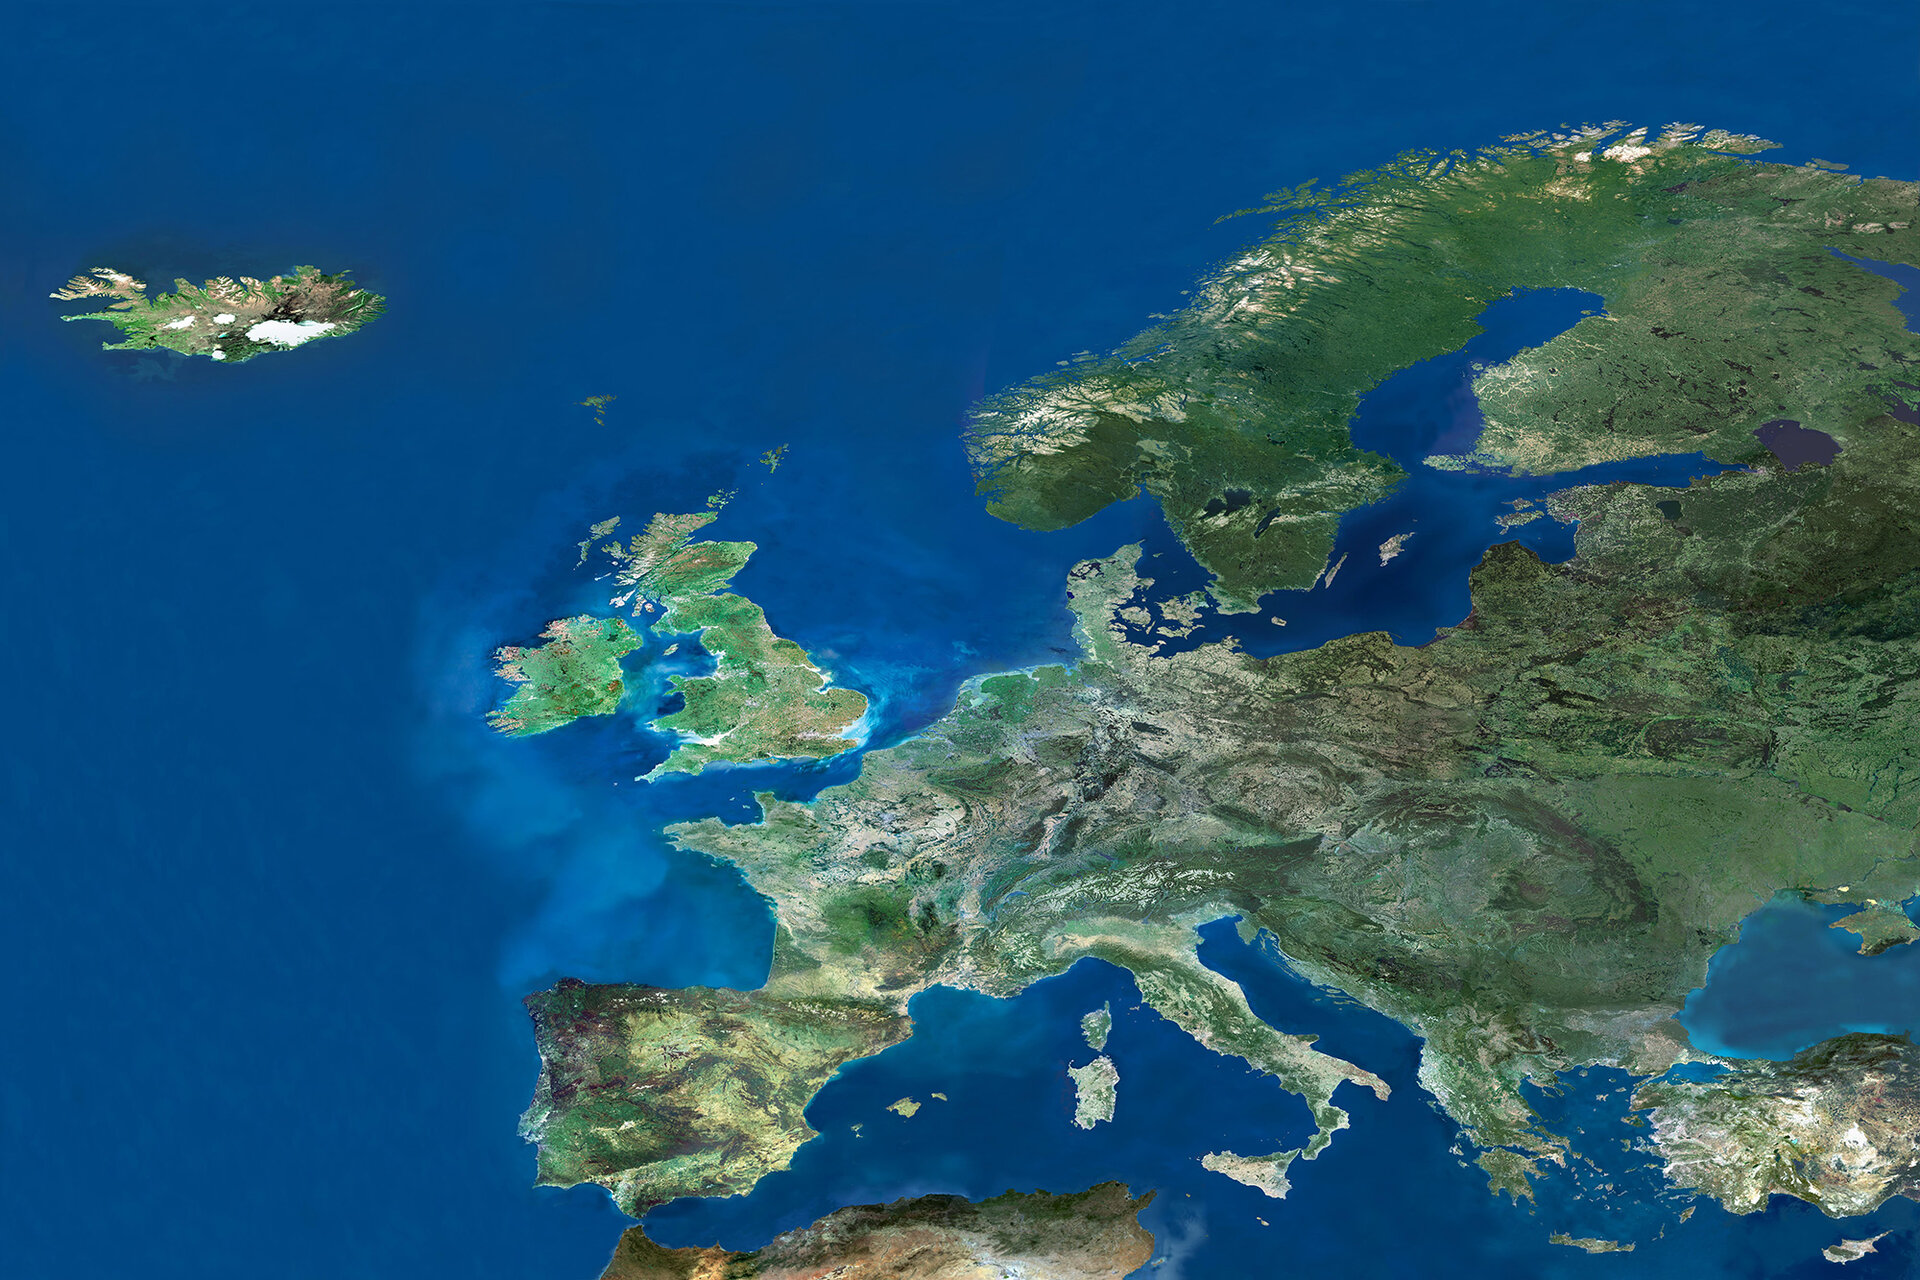 Europe seen by ERS satellite